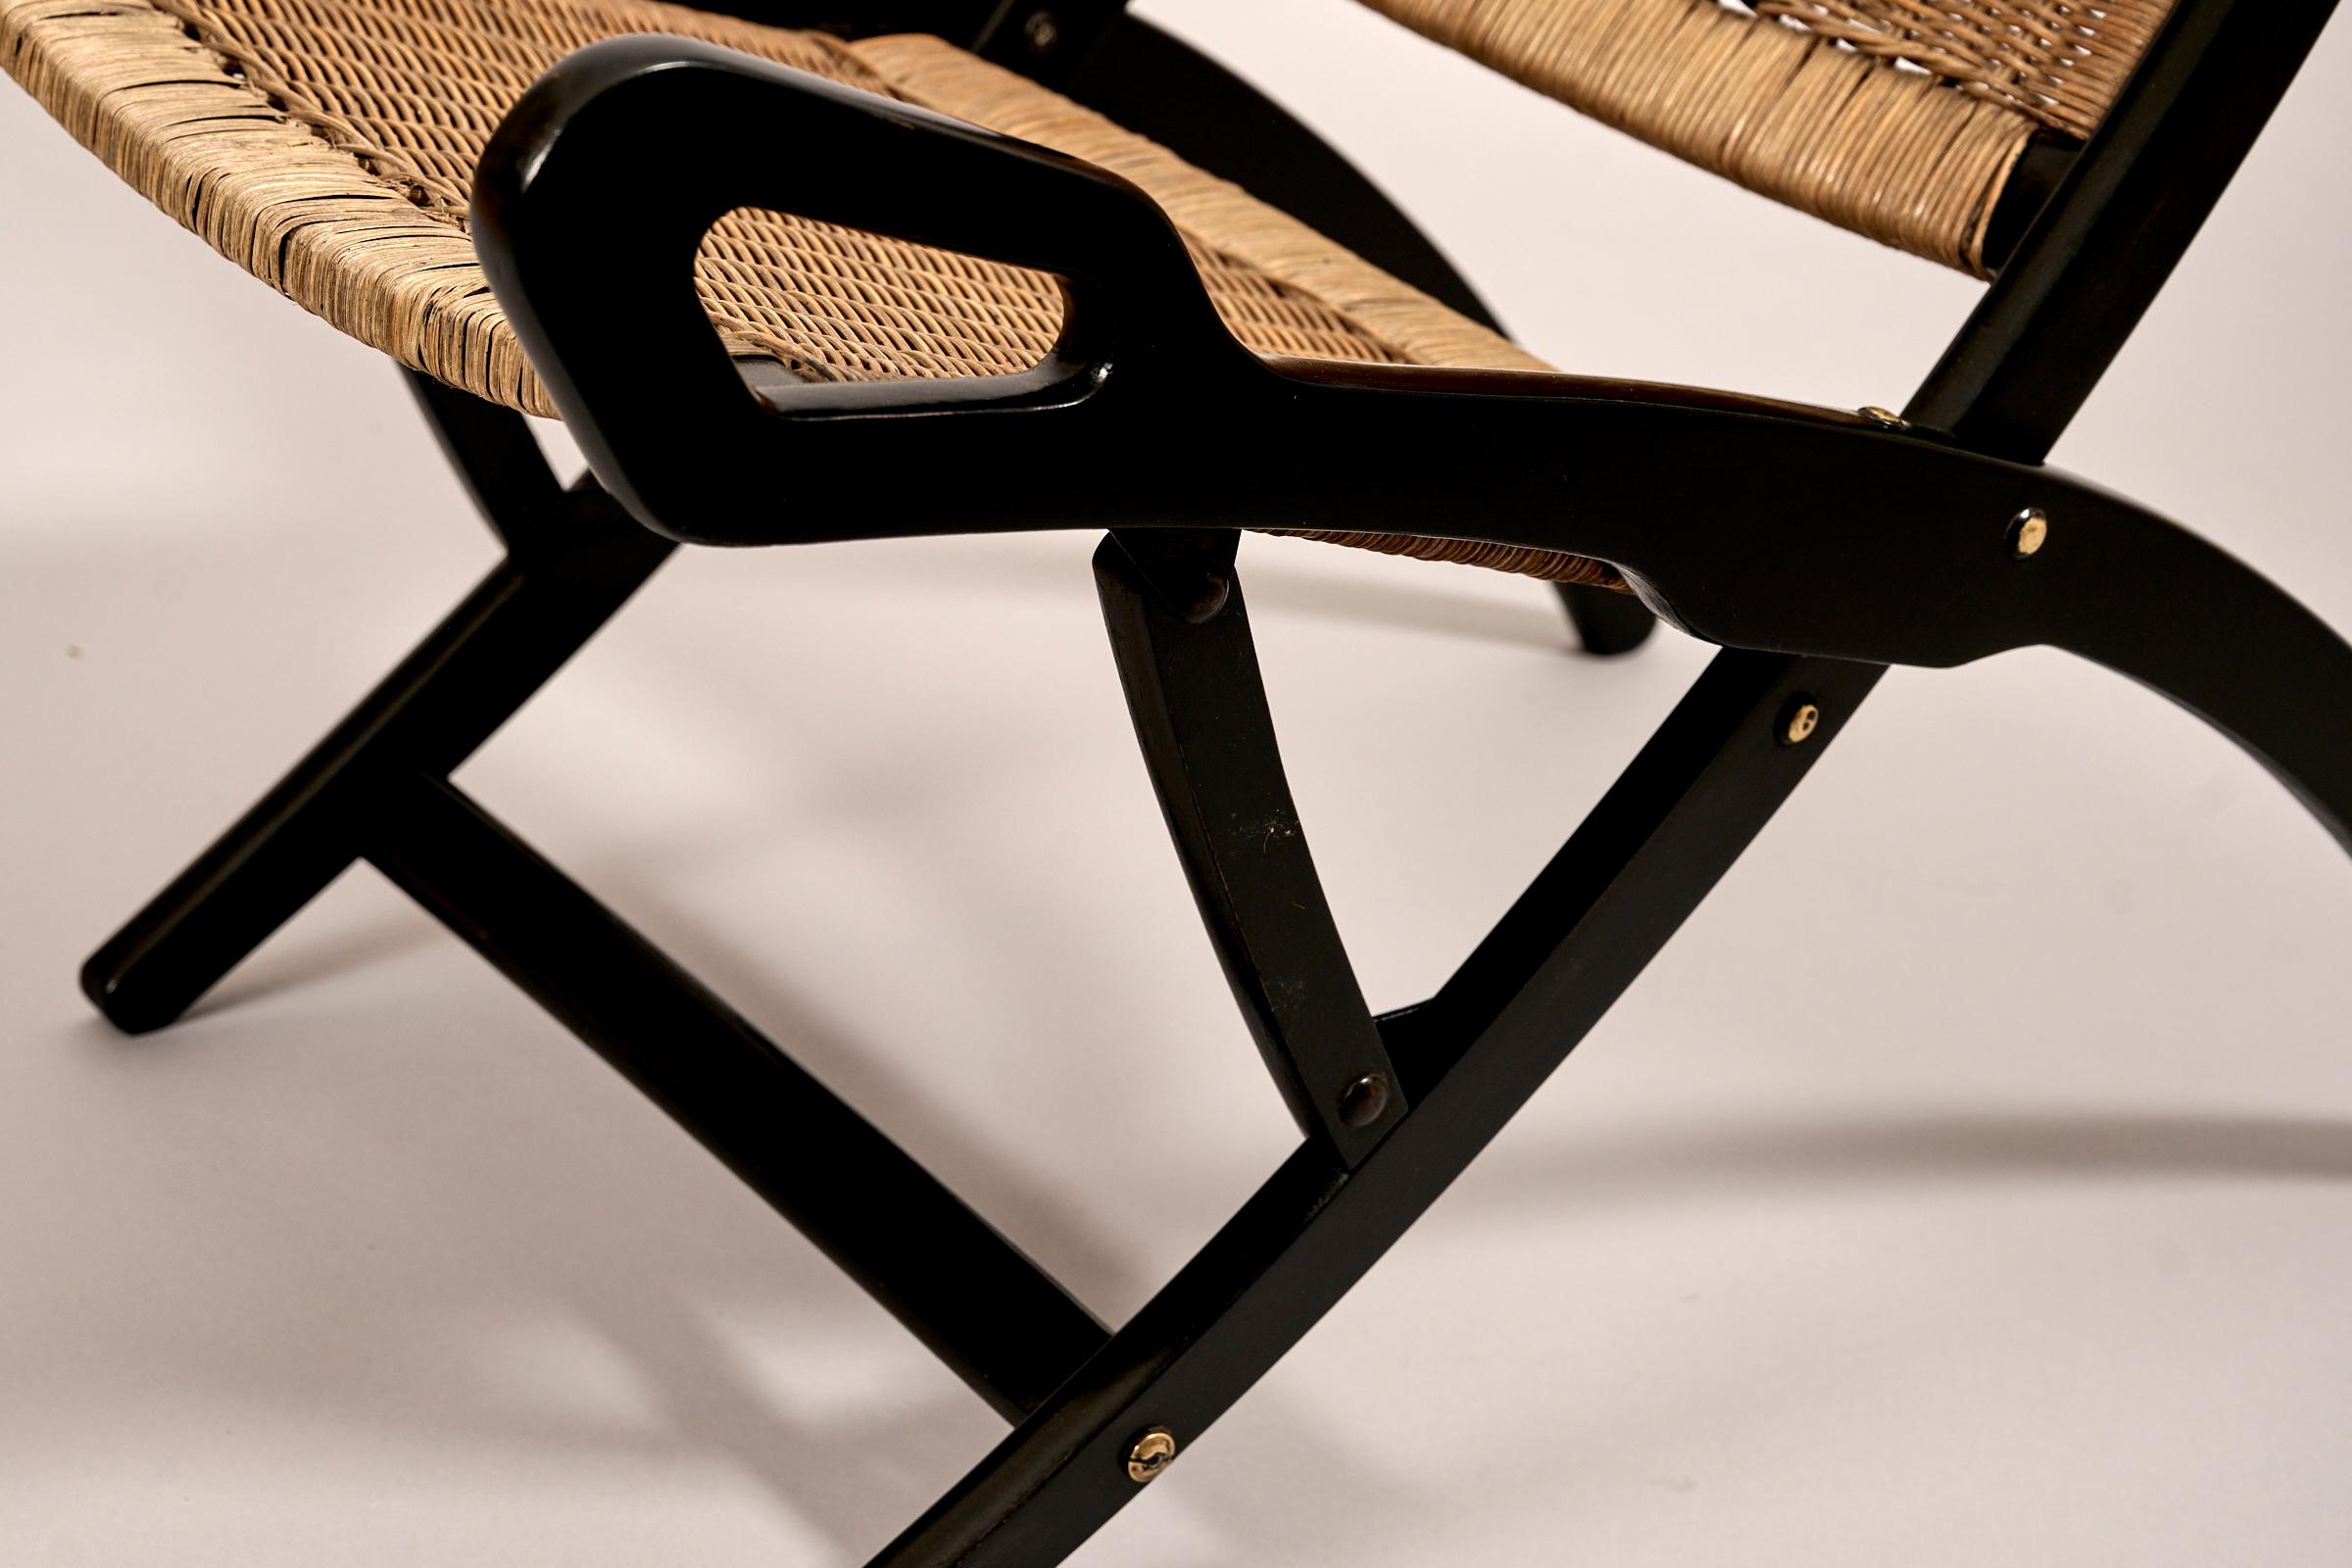 Pair of Gio Ponti, 'Ninfea' Folding Rattan Chairs for Fratelli Reguitti, c 1957 For Sale 1